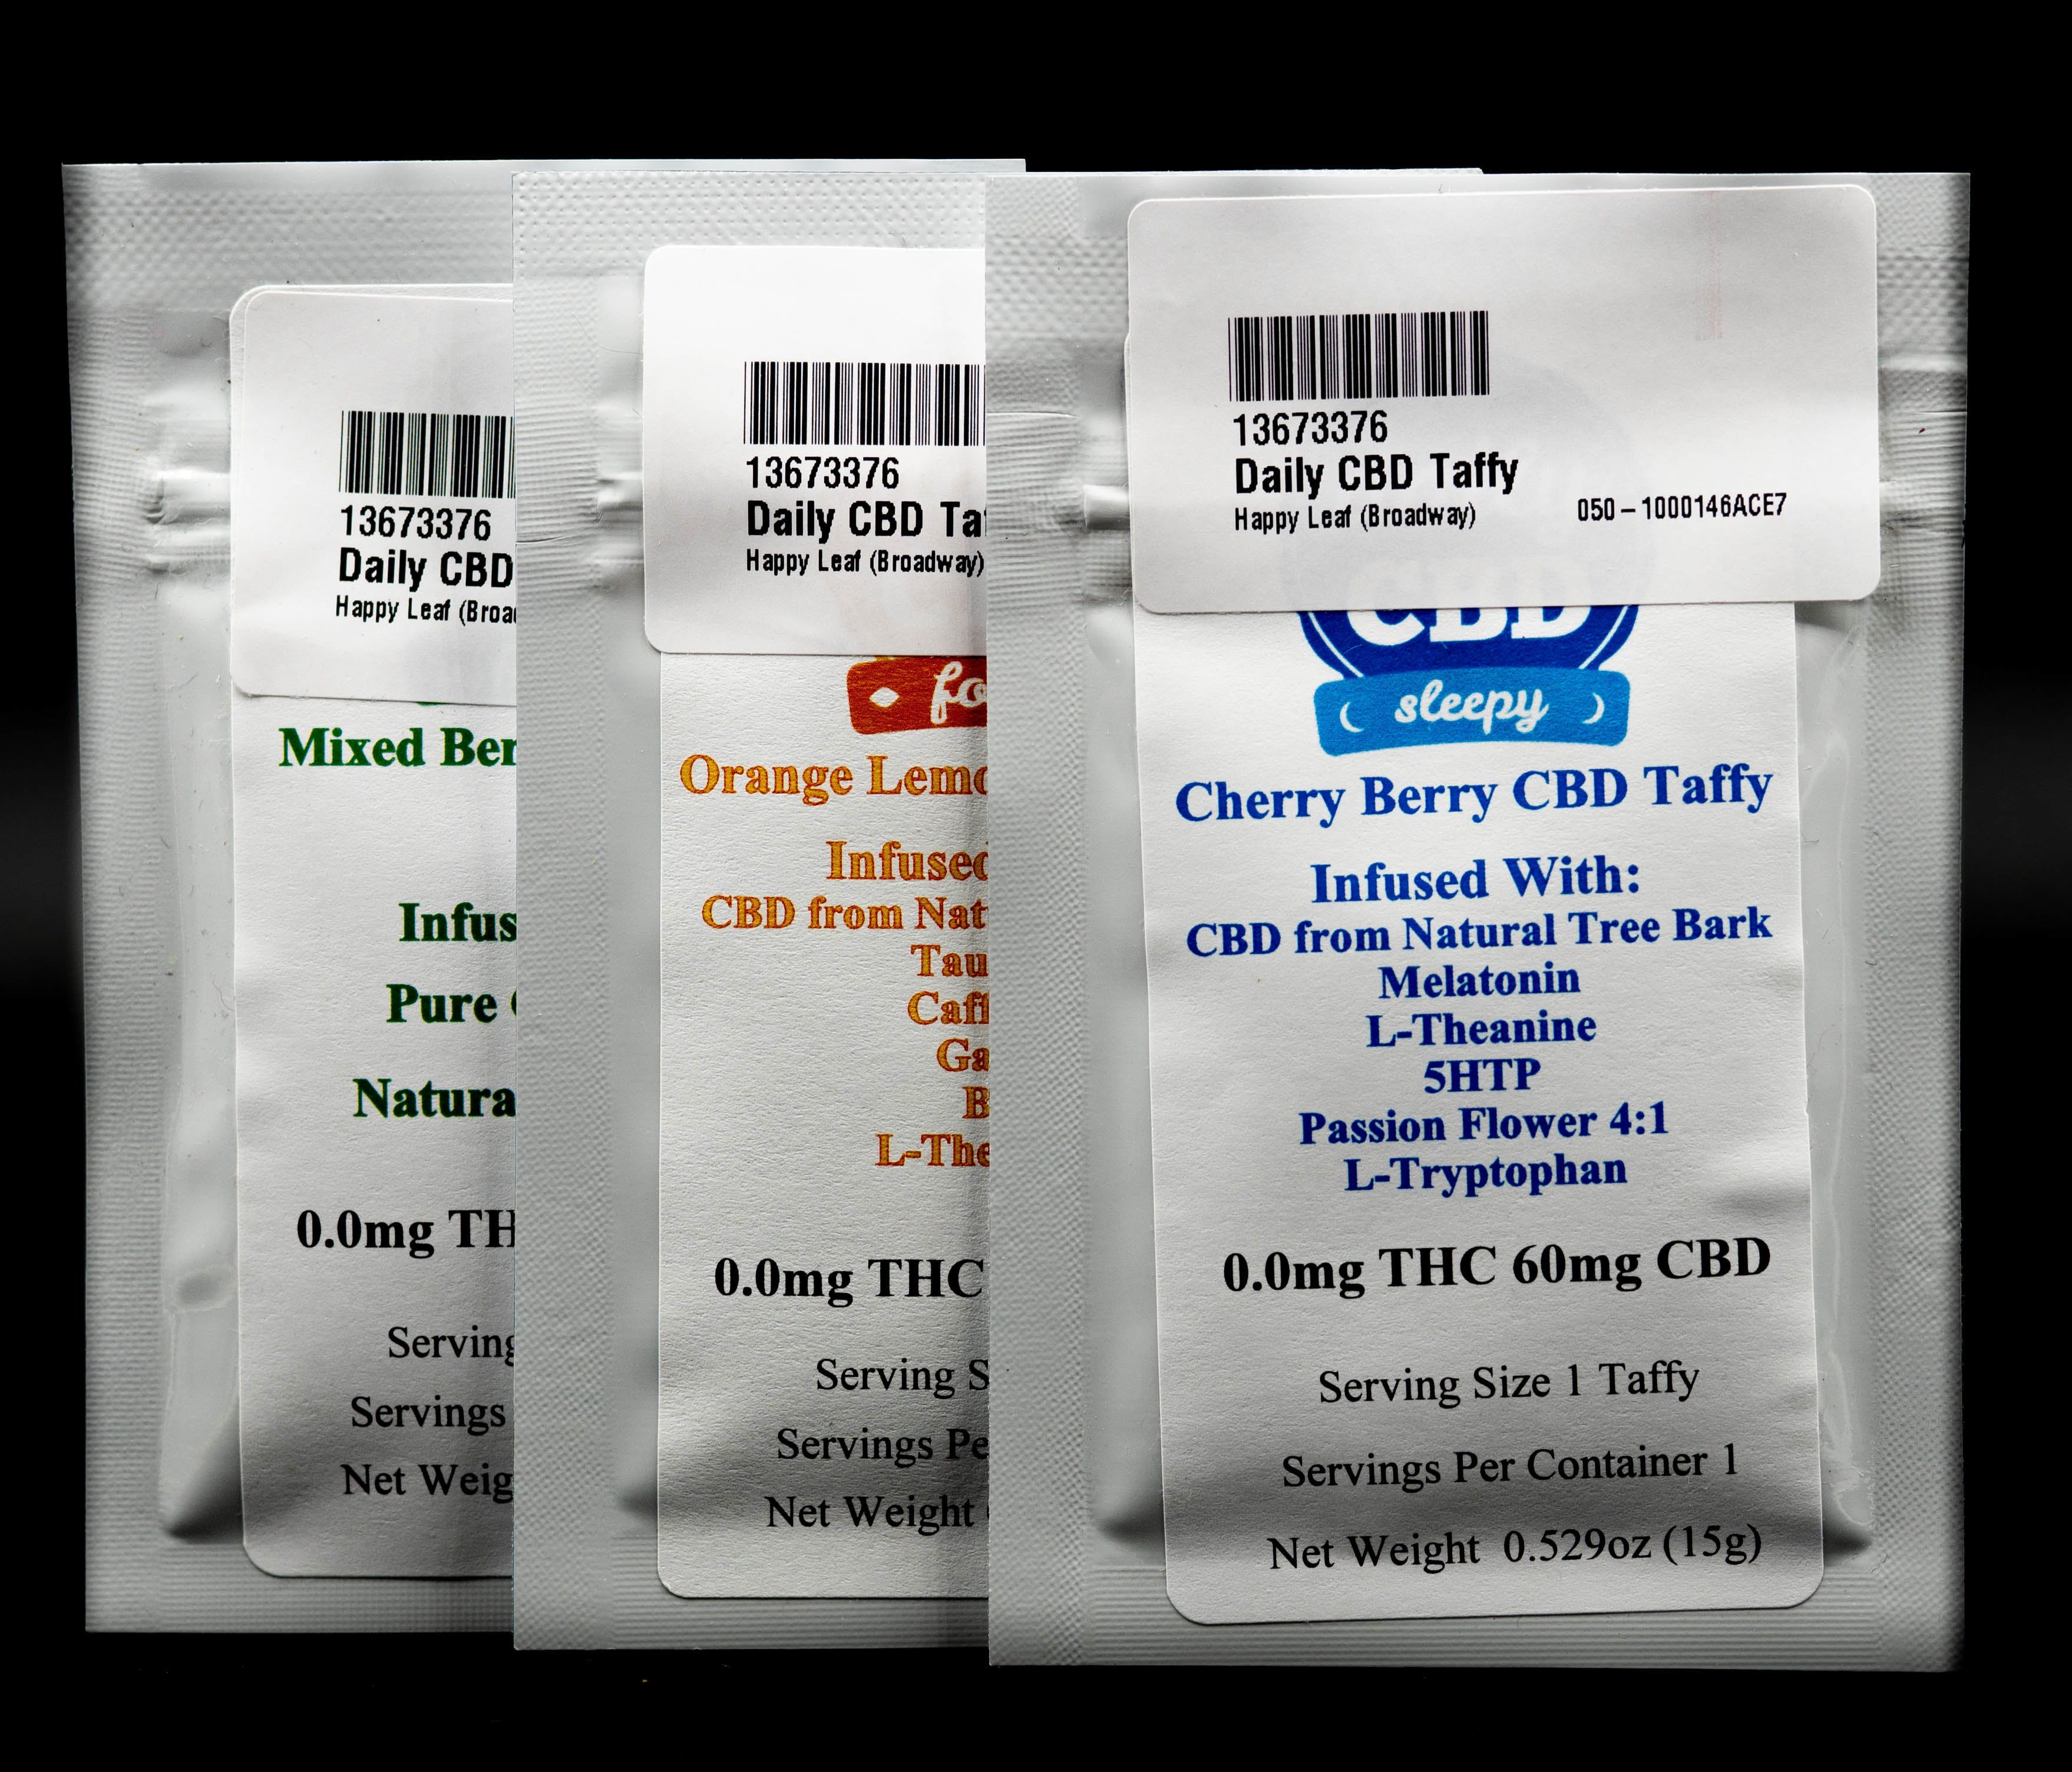 edible-daily-cbd-taffies-in-assorted-flavors-effects-sleepy-2c-pure